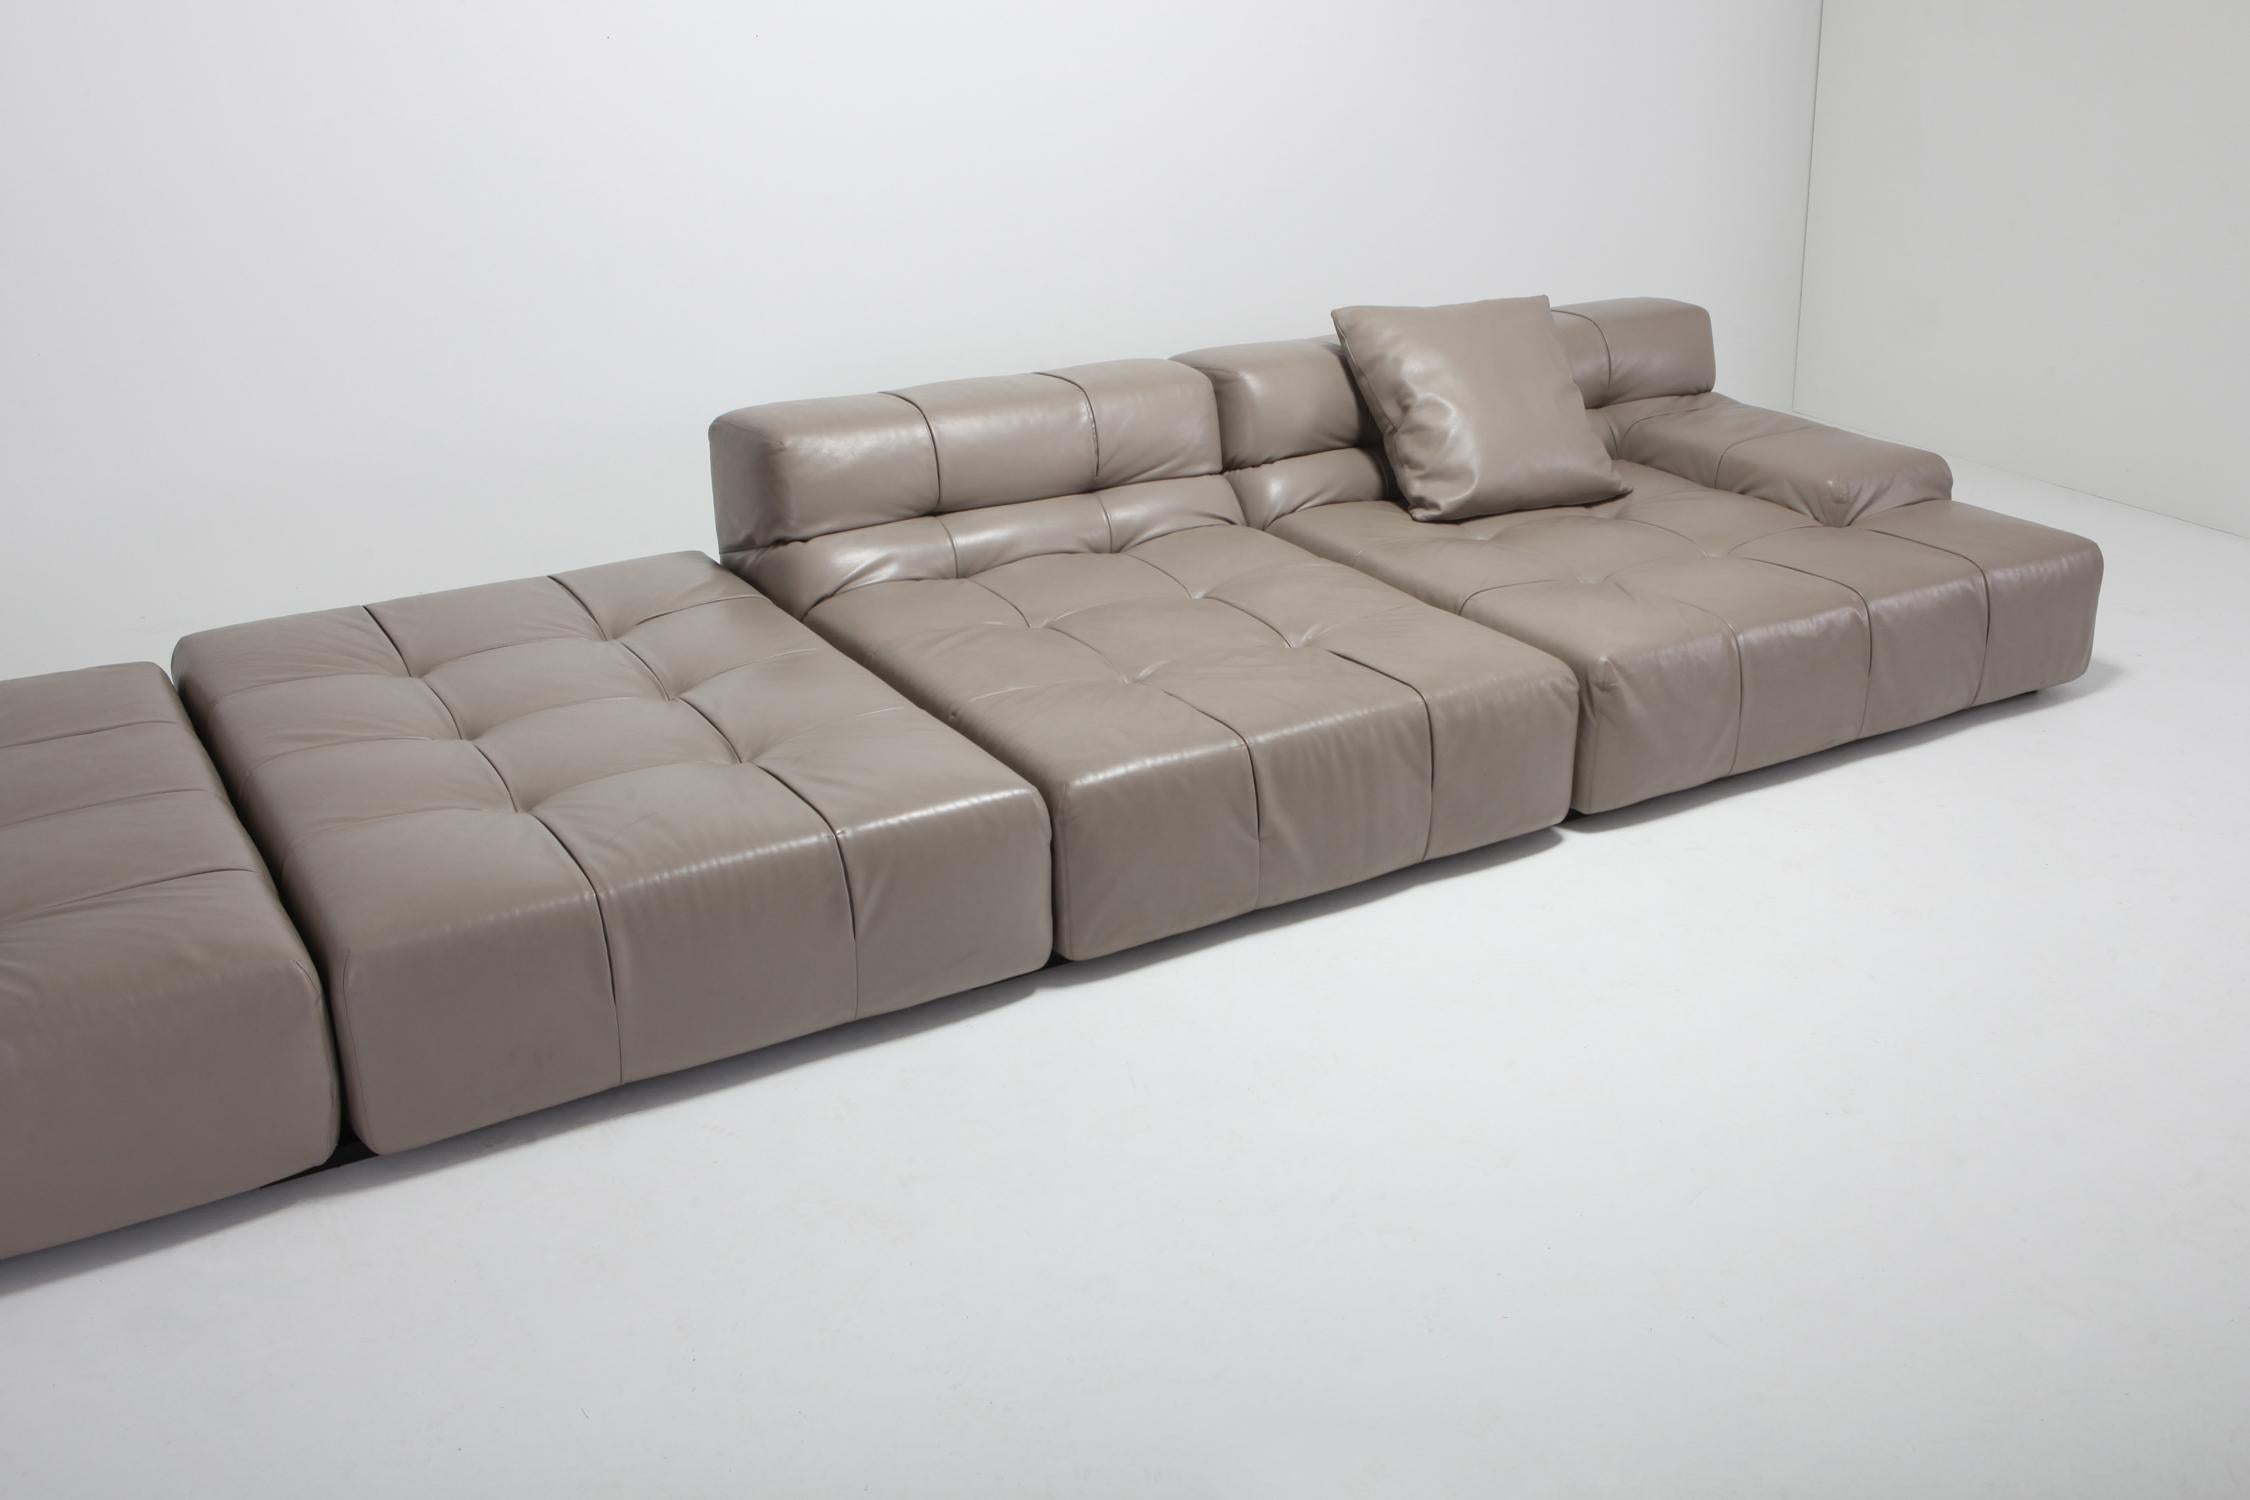 Tufty Time B&B Italia Taupe Leather Sectional Sofa by Patricia Urquiola 1